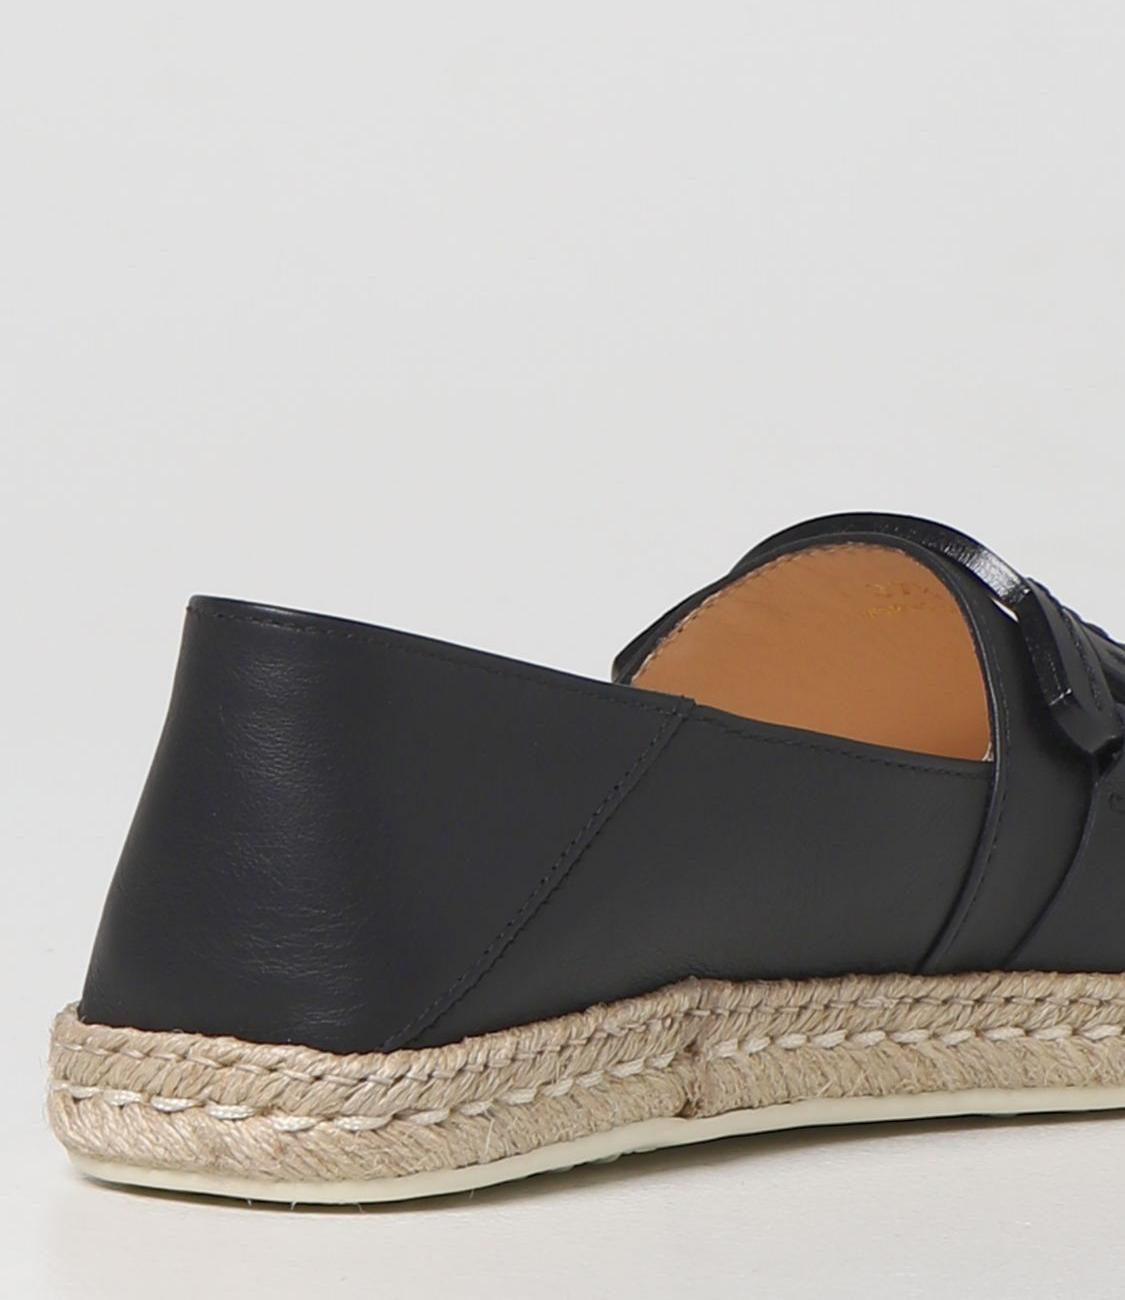 Tod's smooth leather espadrilles